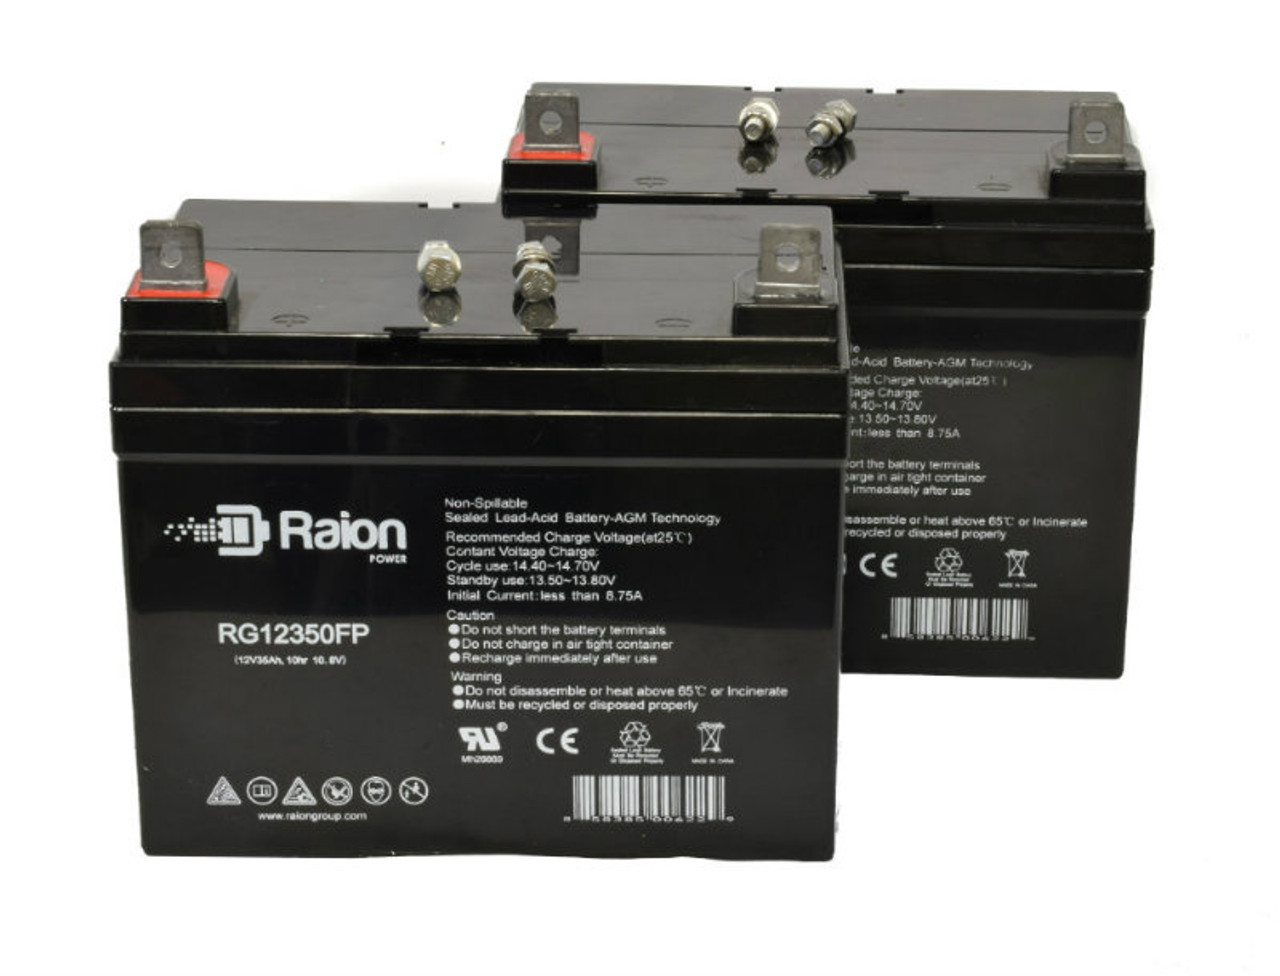 Raion Power Replacement 12V 35Ah Lawn Mower Battery for Ingersoll Equipment 808 - 2 Pack